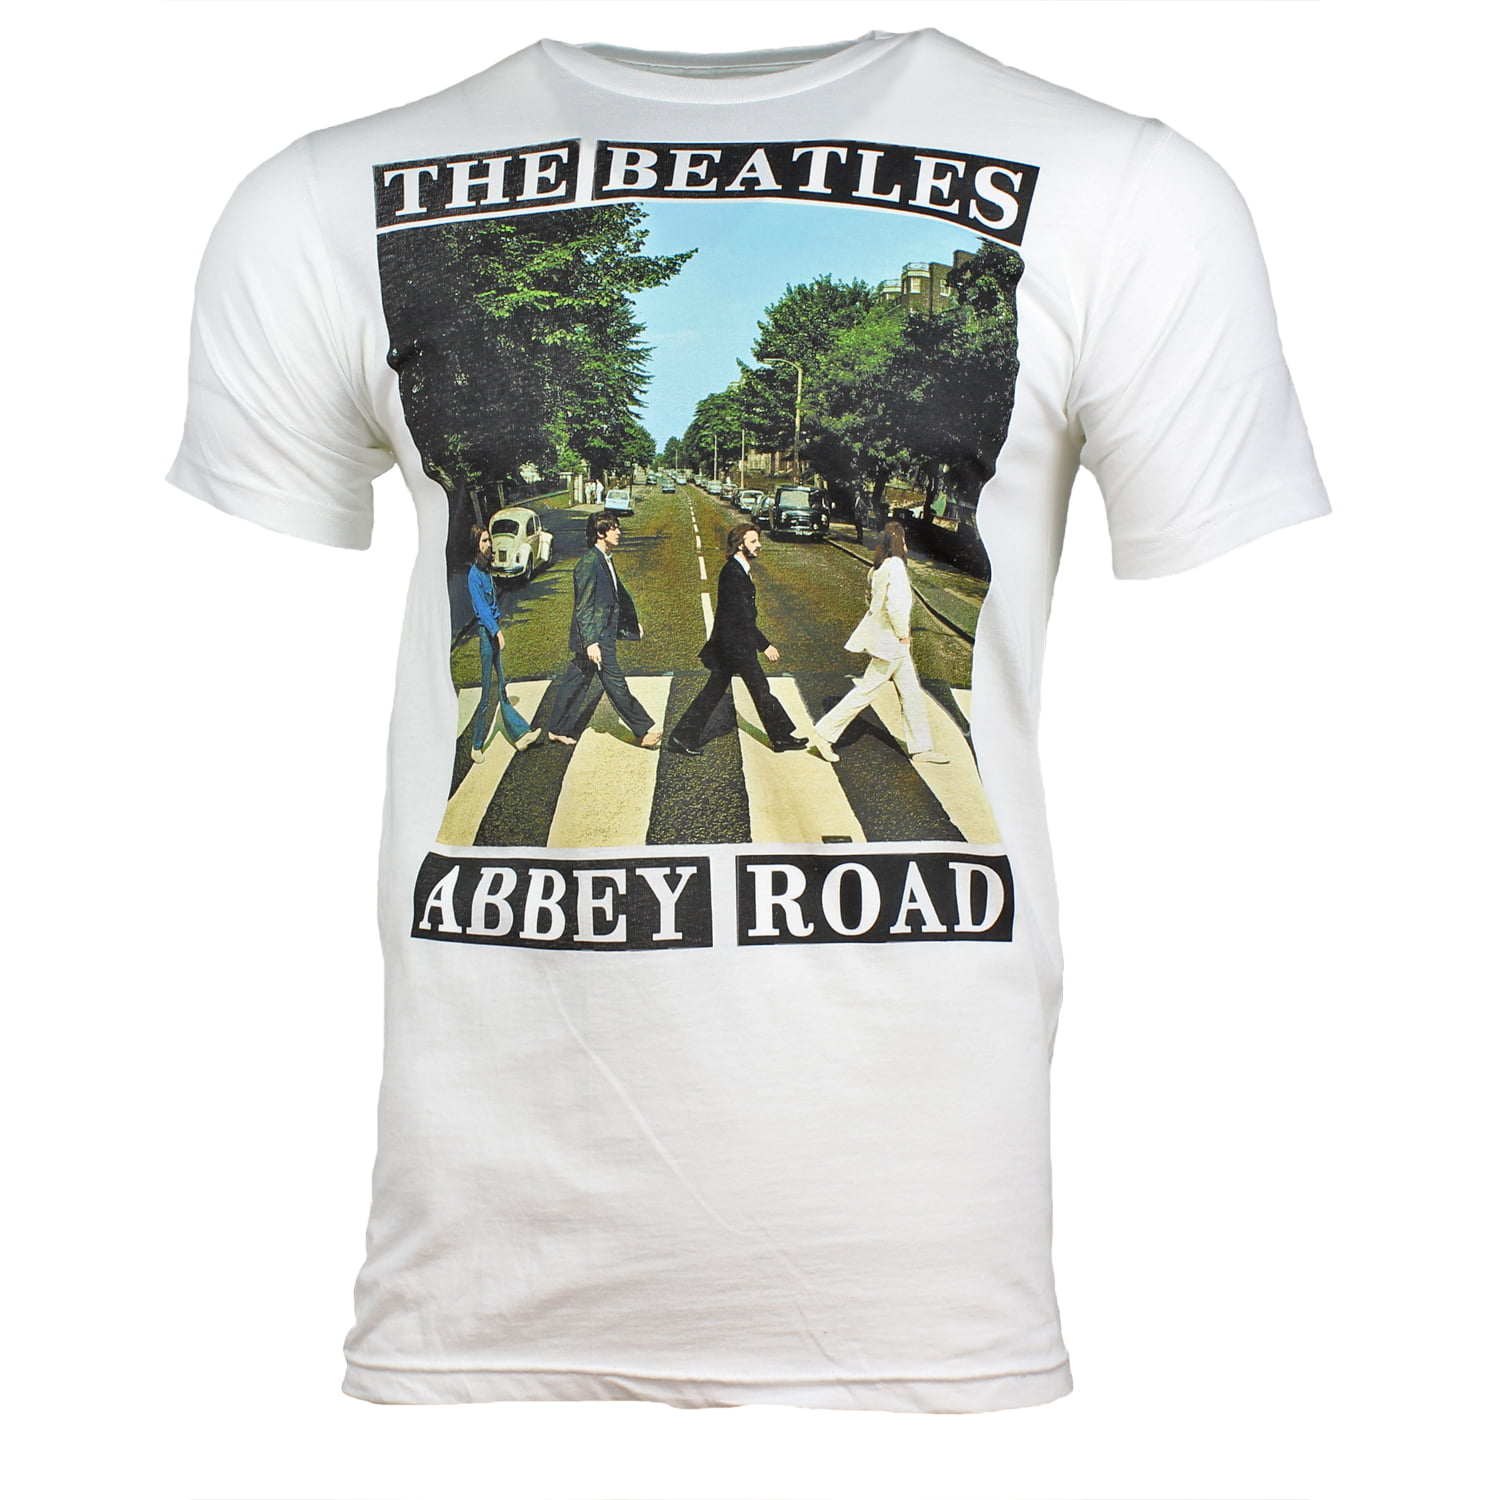 Mens Assorted Rock & Roll Band Tees - The Beatles (White Abbey Road ...